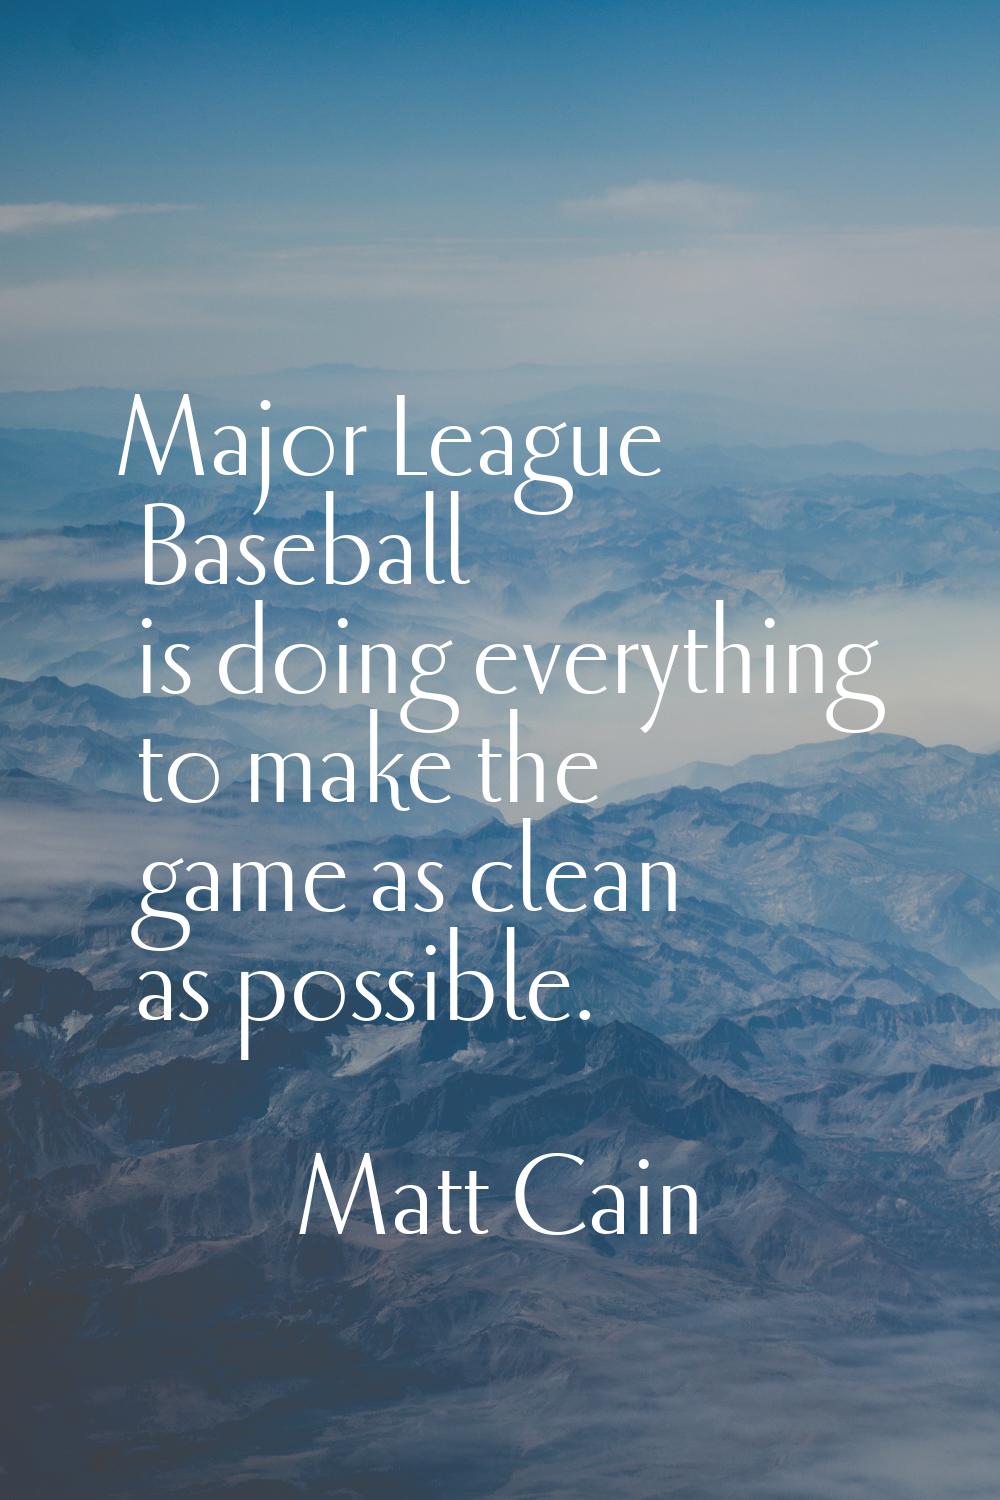 Major League Baseball is doing everything to make the game as clean as possible.